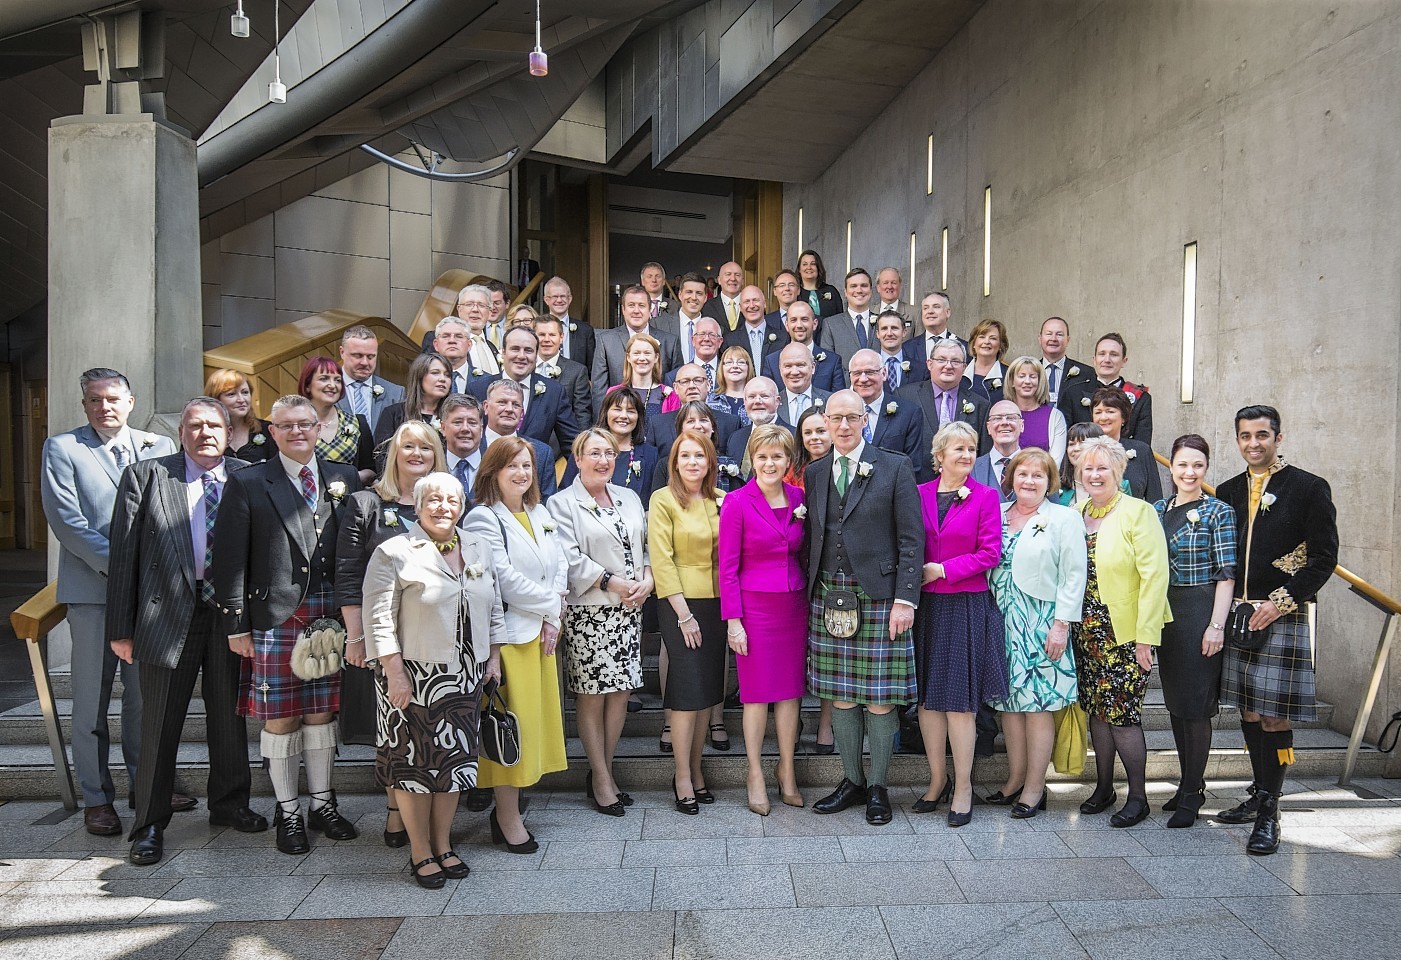 Newly elected SNP MSPs after being sworn in during the ceremony at the Scottish Parliament in Edinburgh